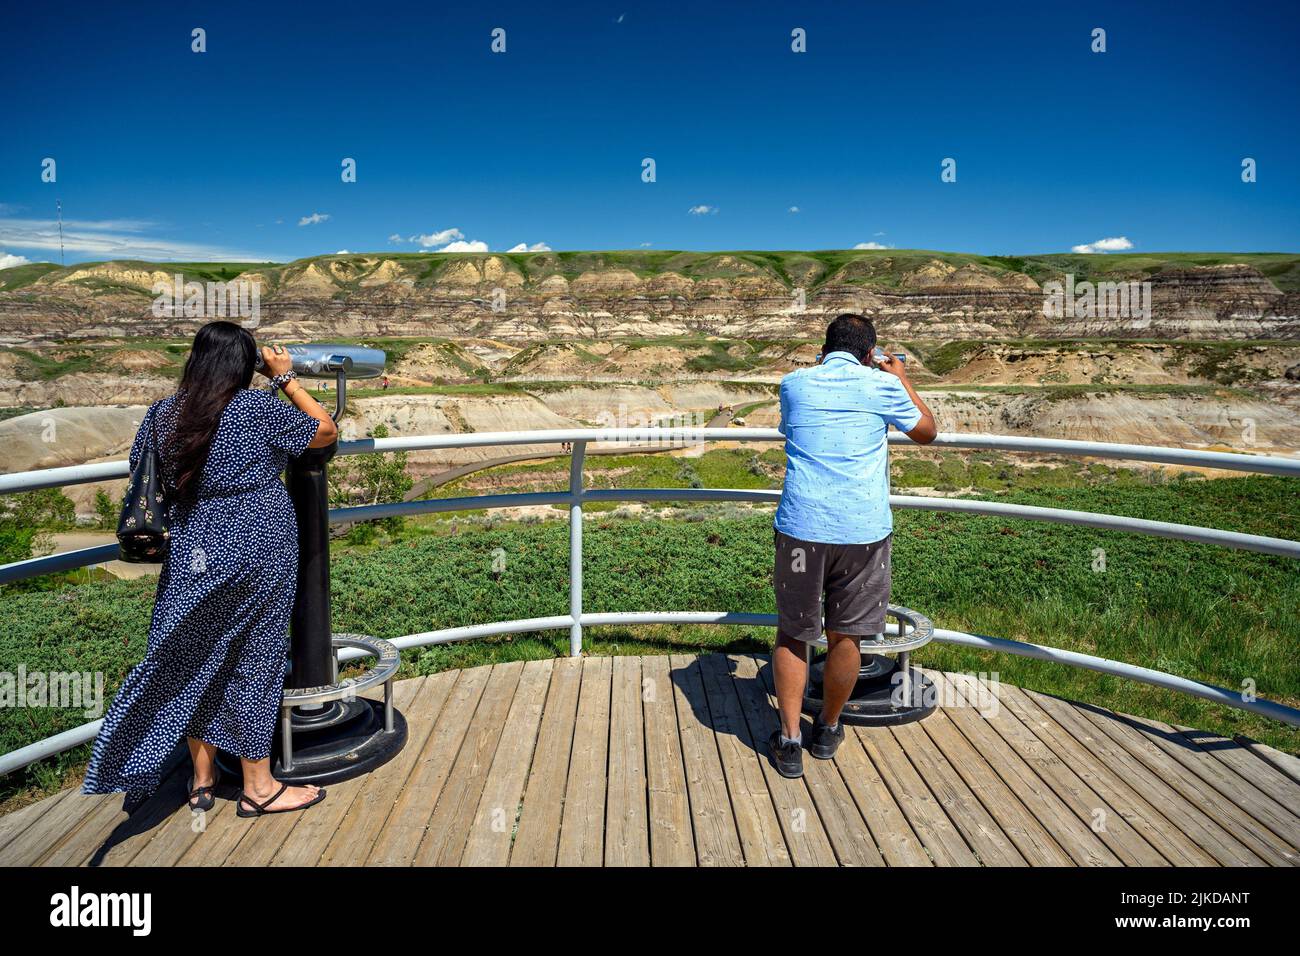 Tourists observing the landscape of the Canadian Badlands via binocular in Drumheller, the dinosaur capital of the world, Alberta, Canada. Stock Photo